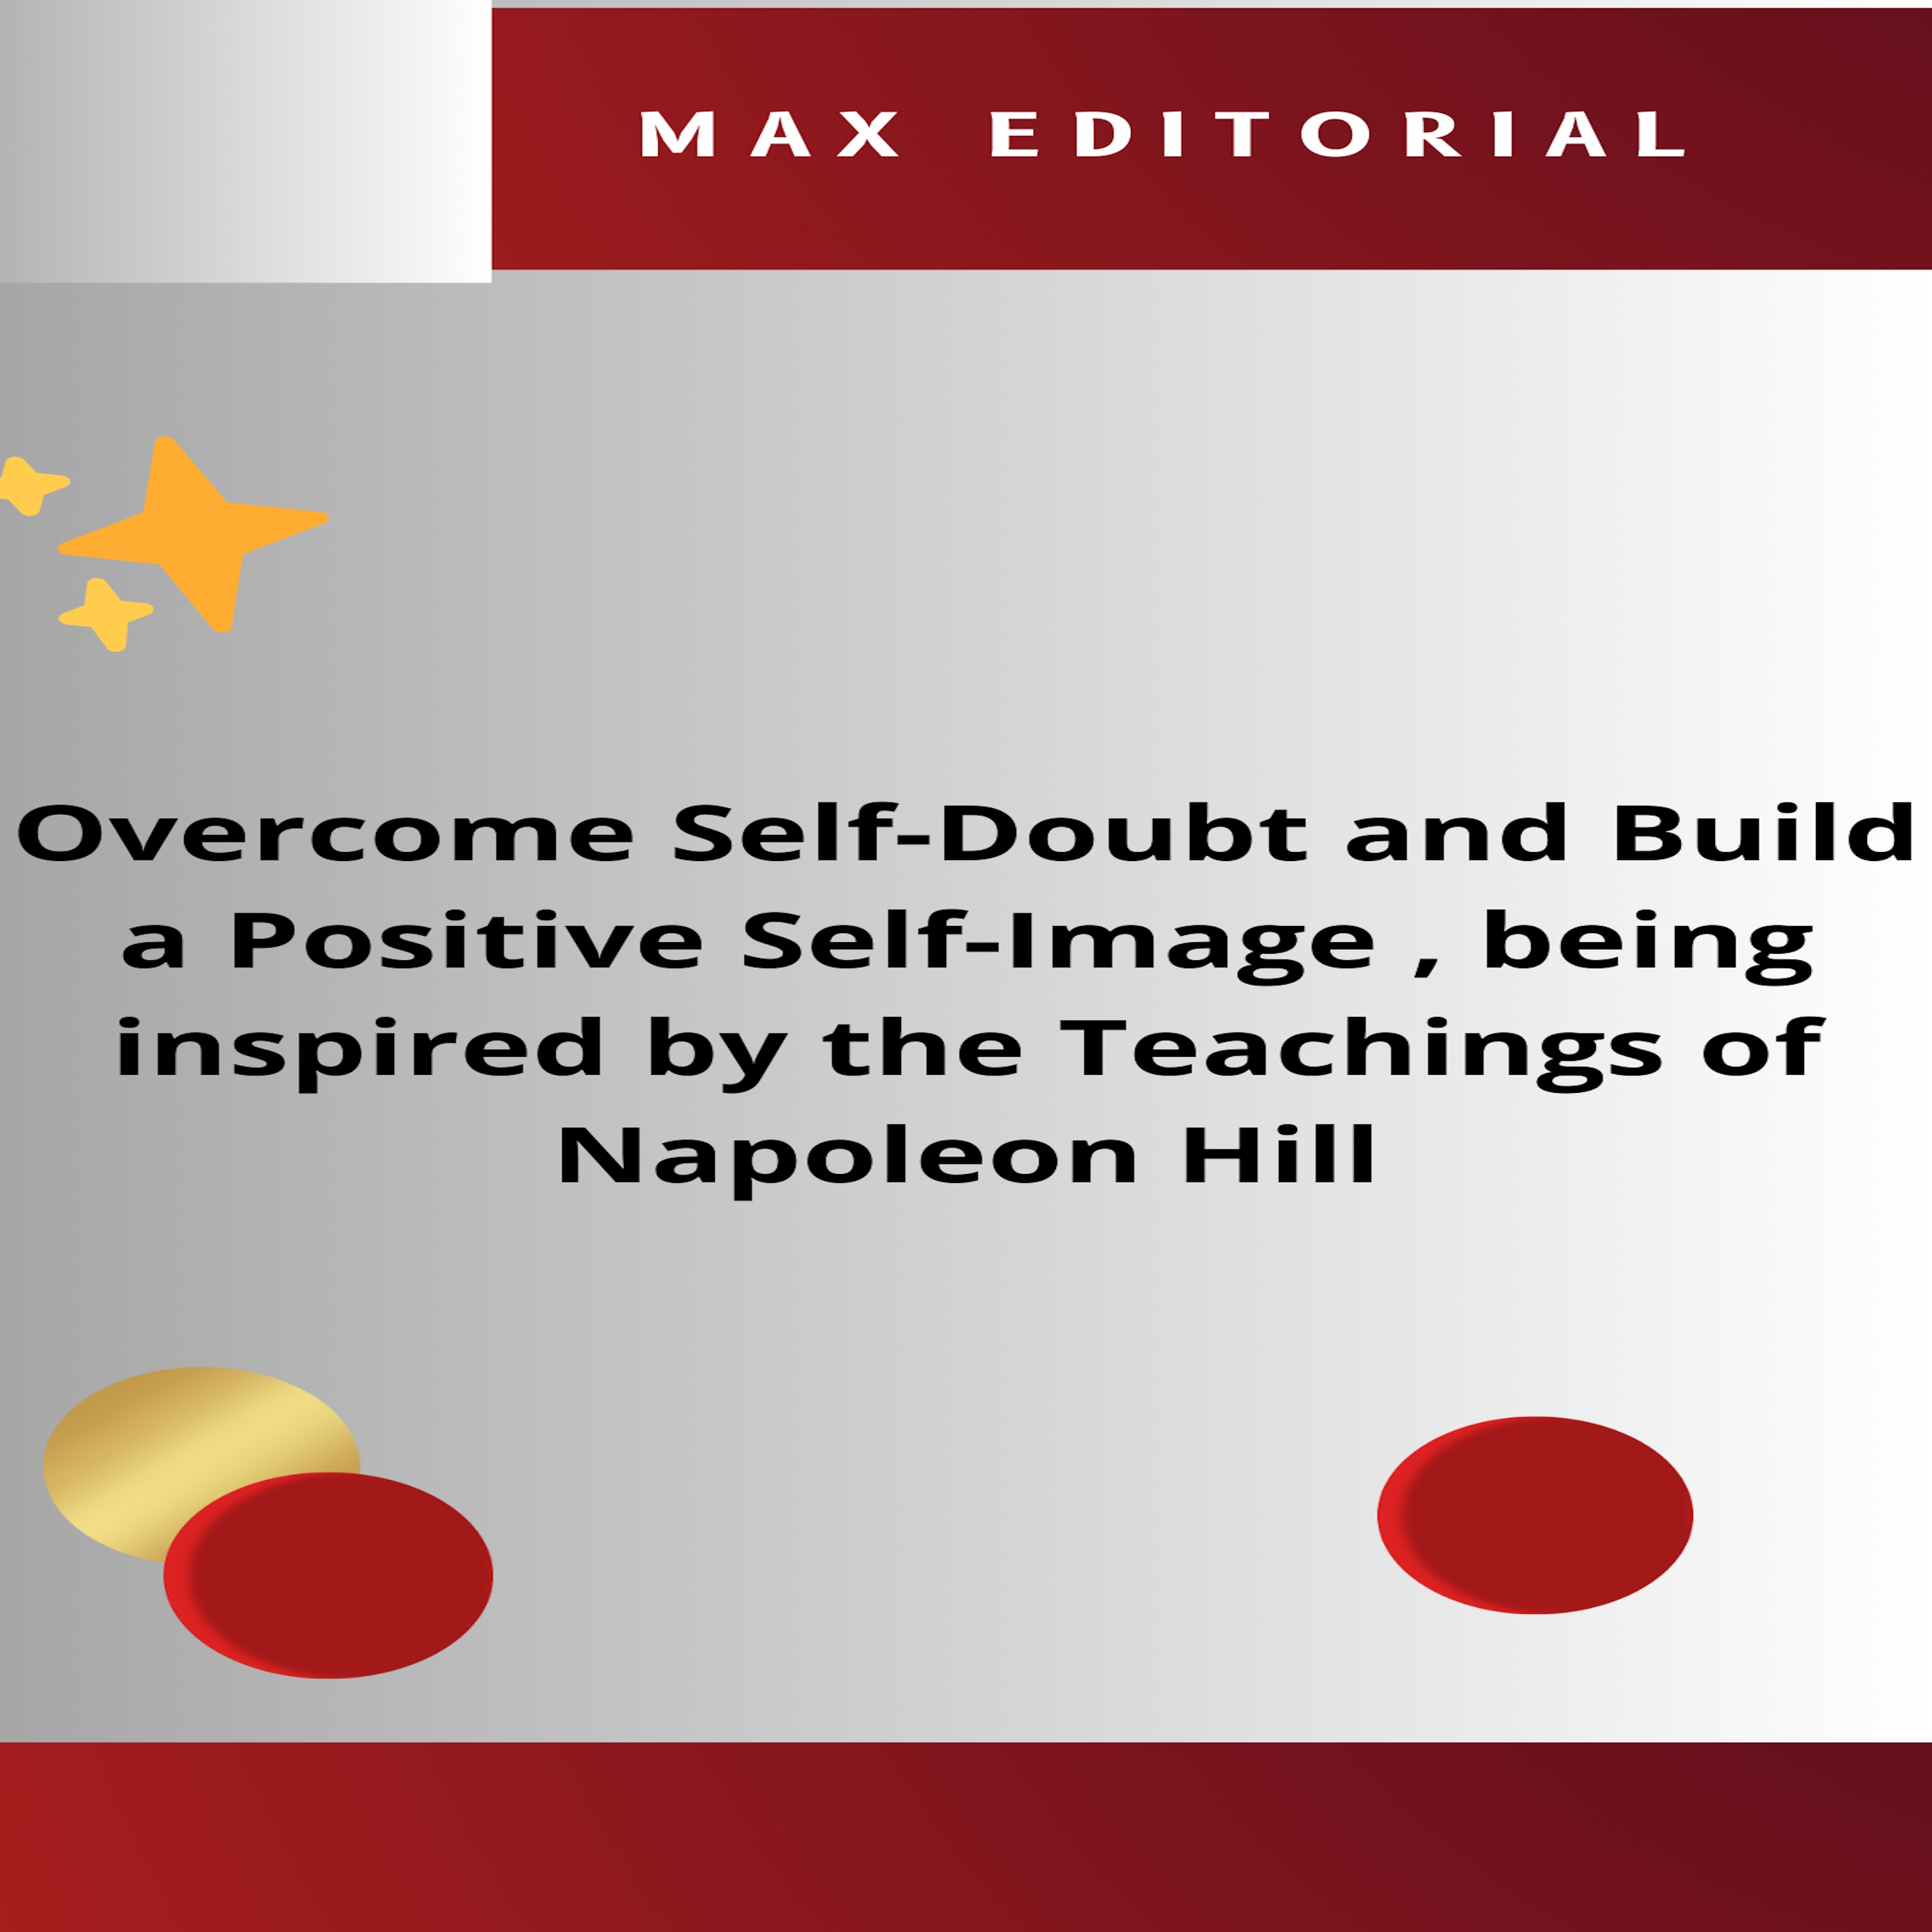 Overcome Self-Doubt and Build a Positive Self-Image , being inspired by the Teachings of Napoleon Hill